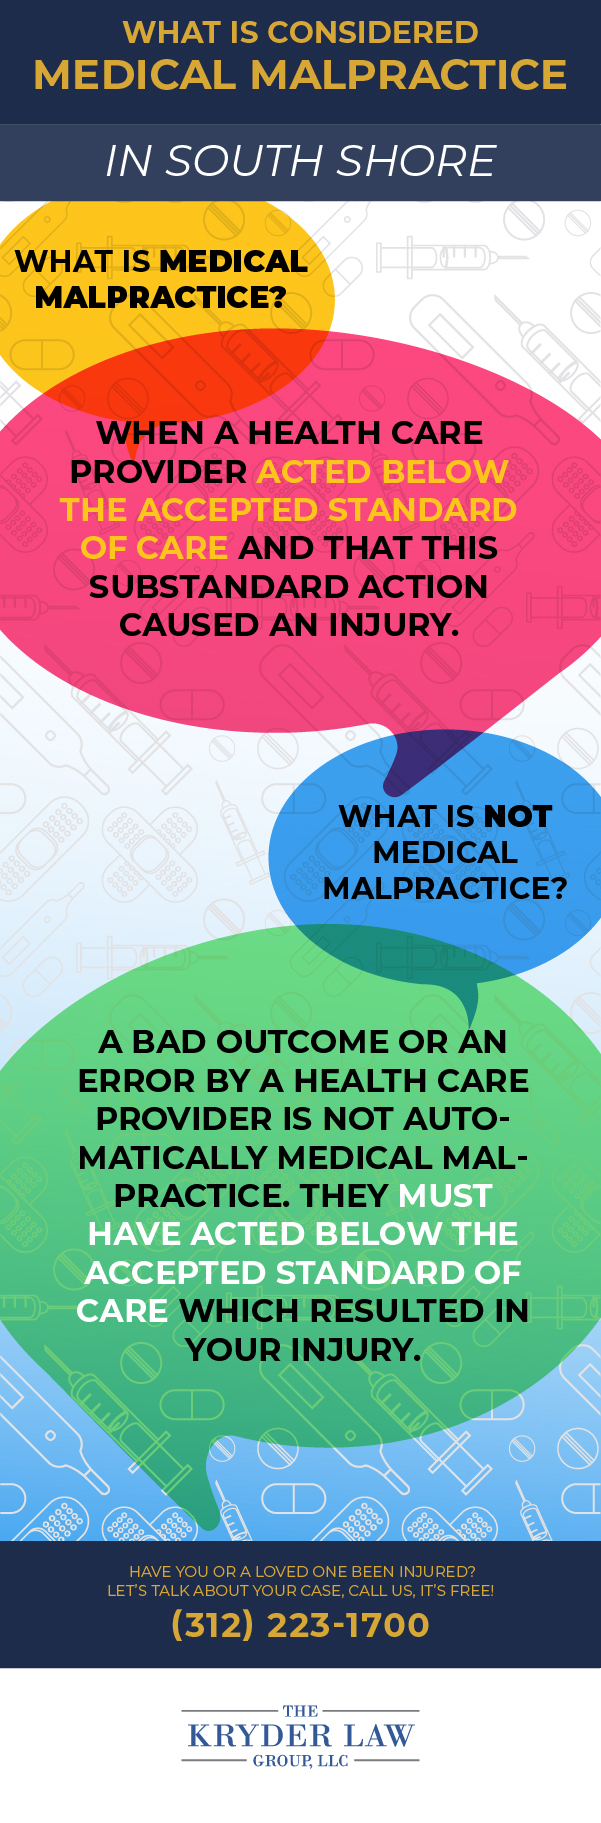 South Shore Medical Malpractice Lawyer Infographic